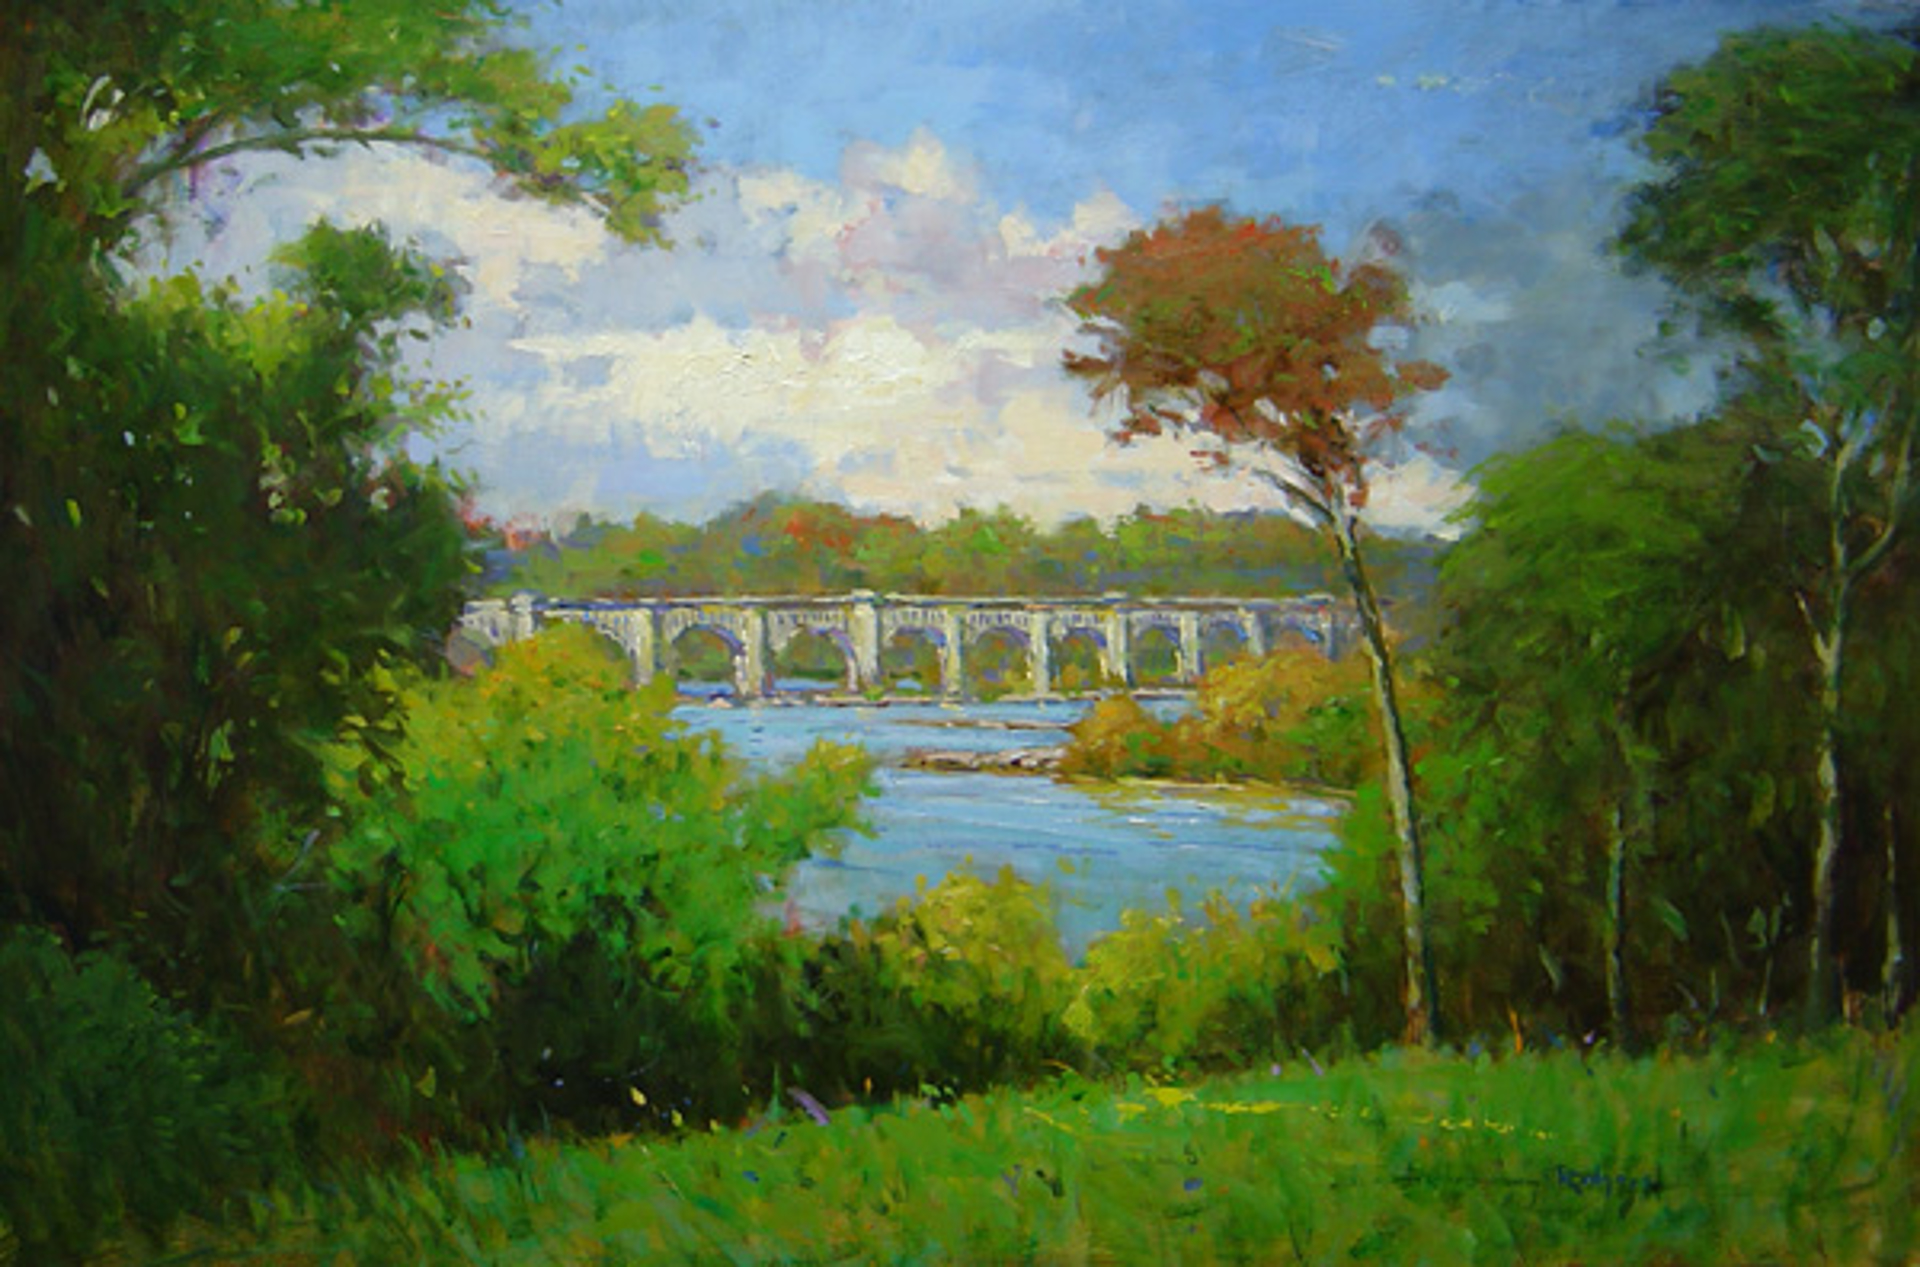 October Afternoon on the Bridge by Jim Rodgers